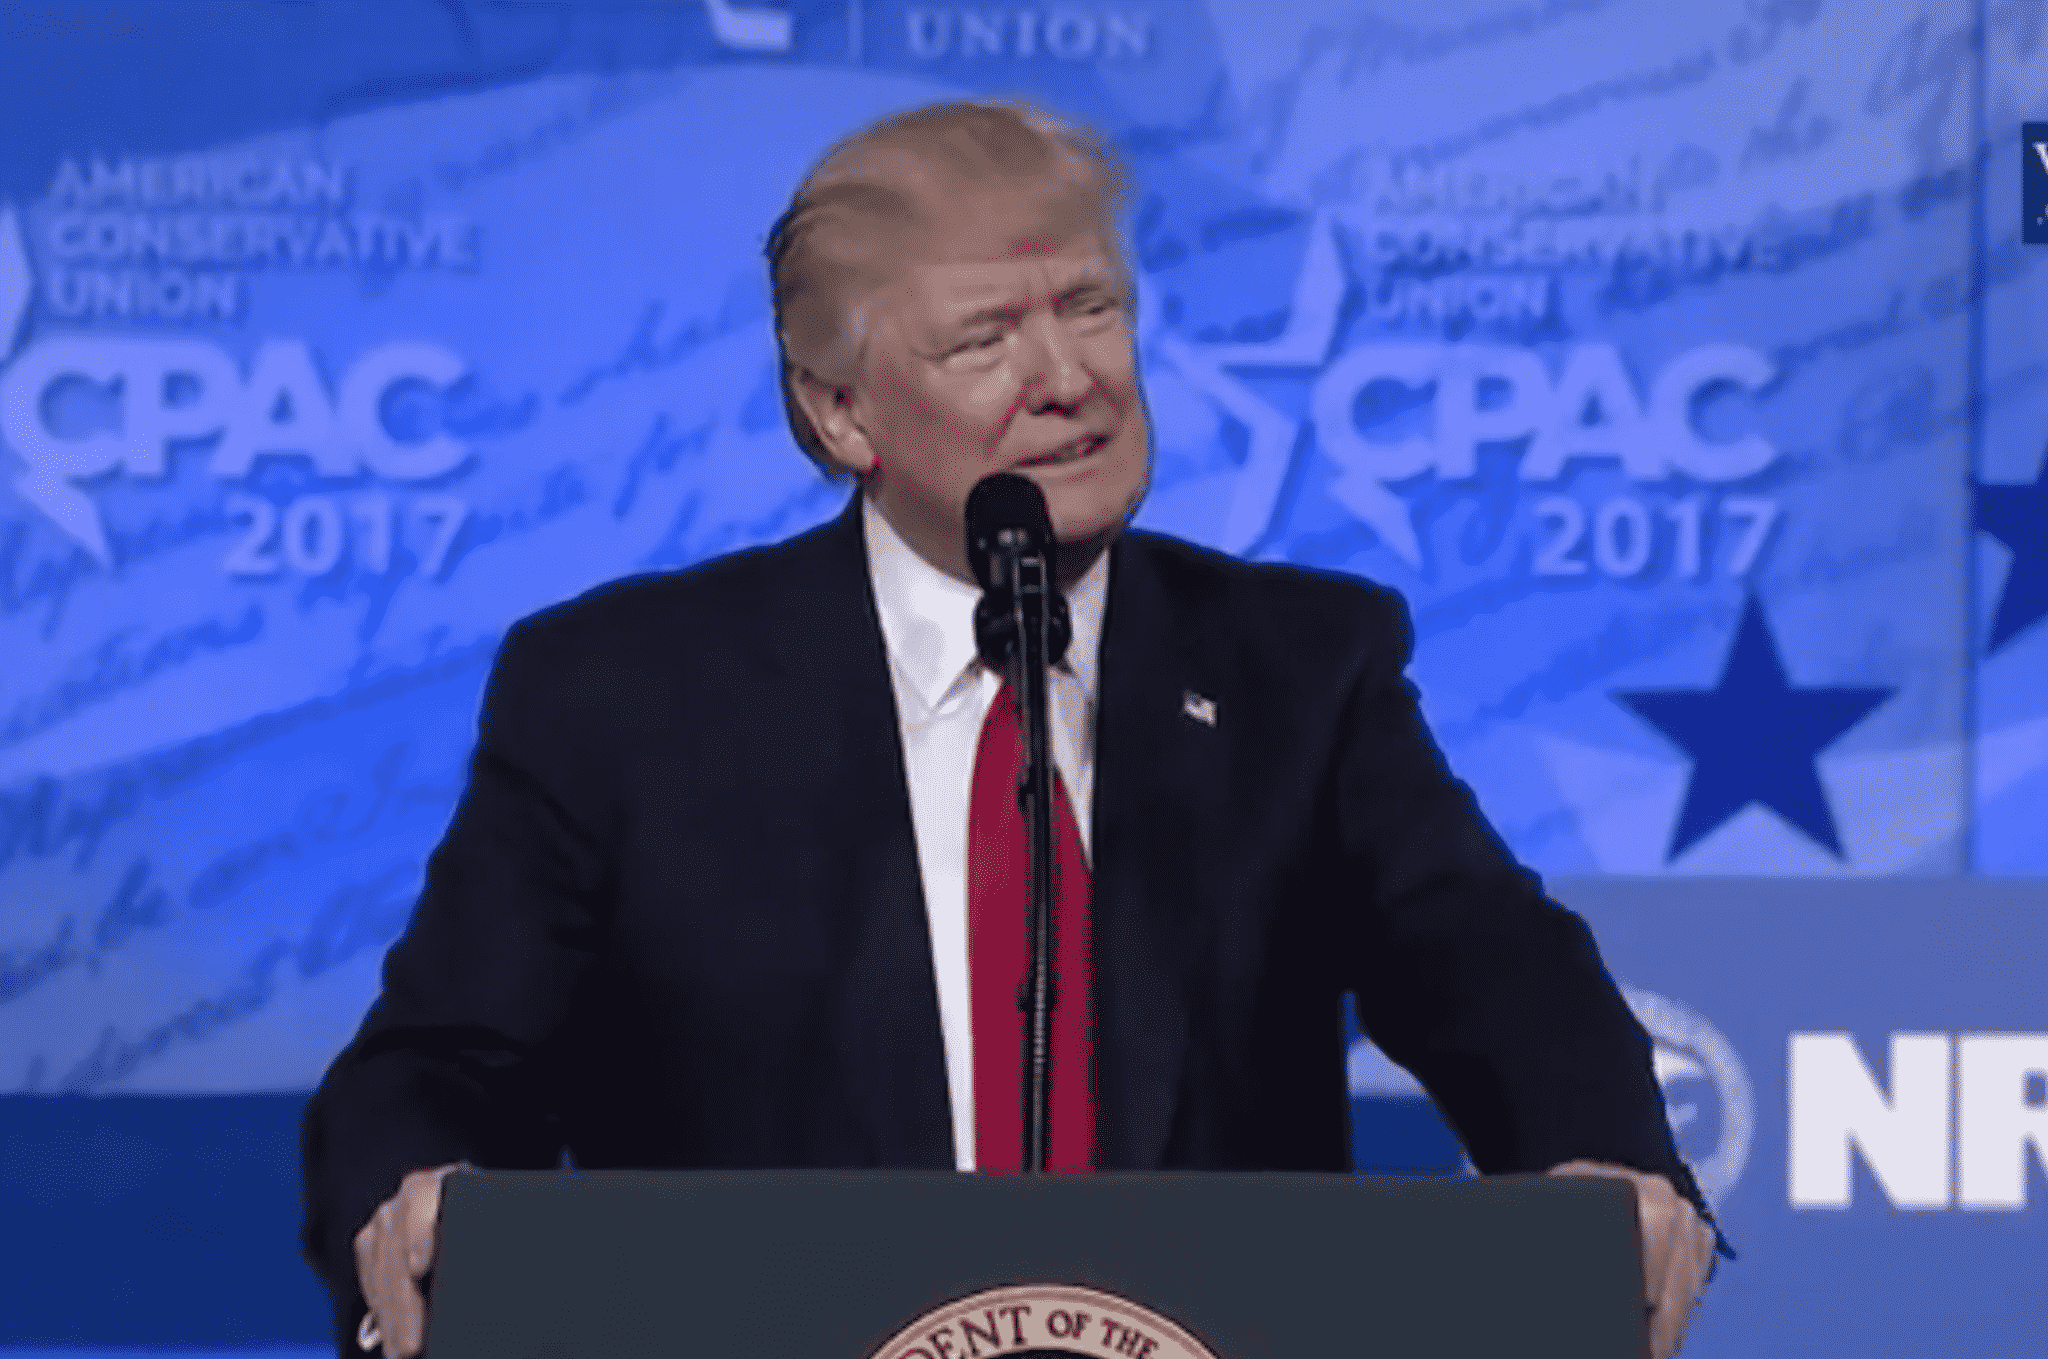 [CREDIT: White House] President Donald Trump delivers remarks at the Conservative Political Action Conference (CPAC). Trump has been delaying using the DPA to provide supplies in the COVID-19 fight.